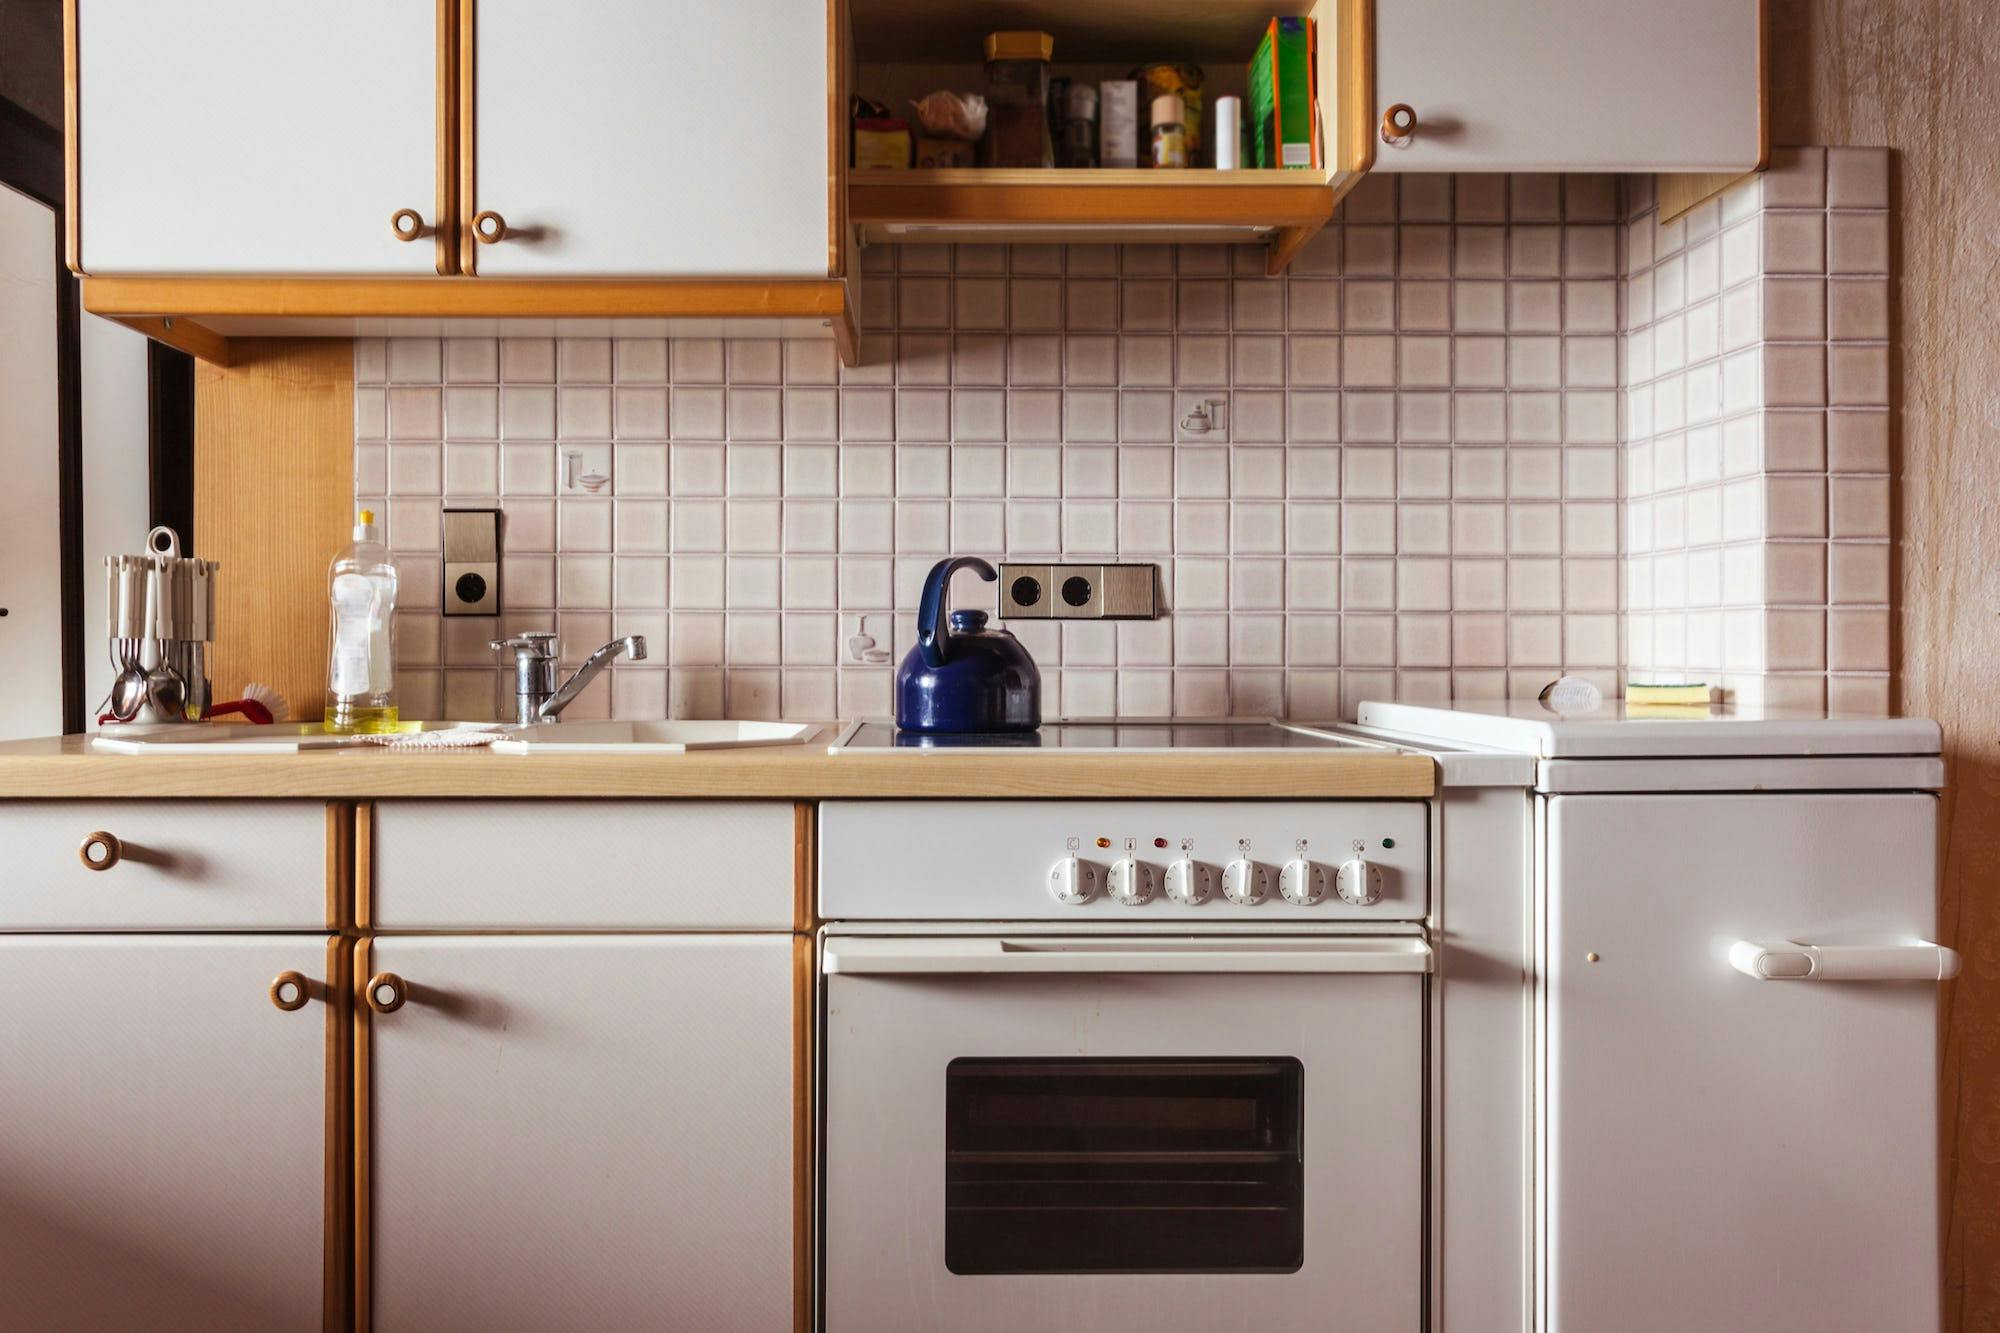 An old, outdated kitchen could be a deal breaker for potential renters